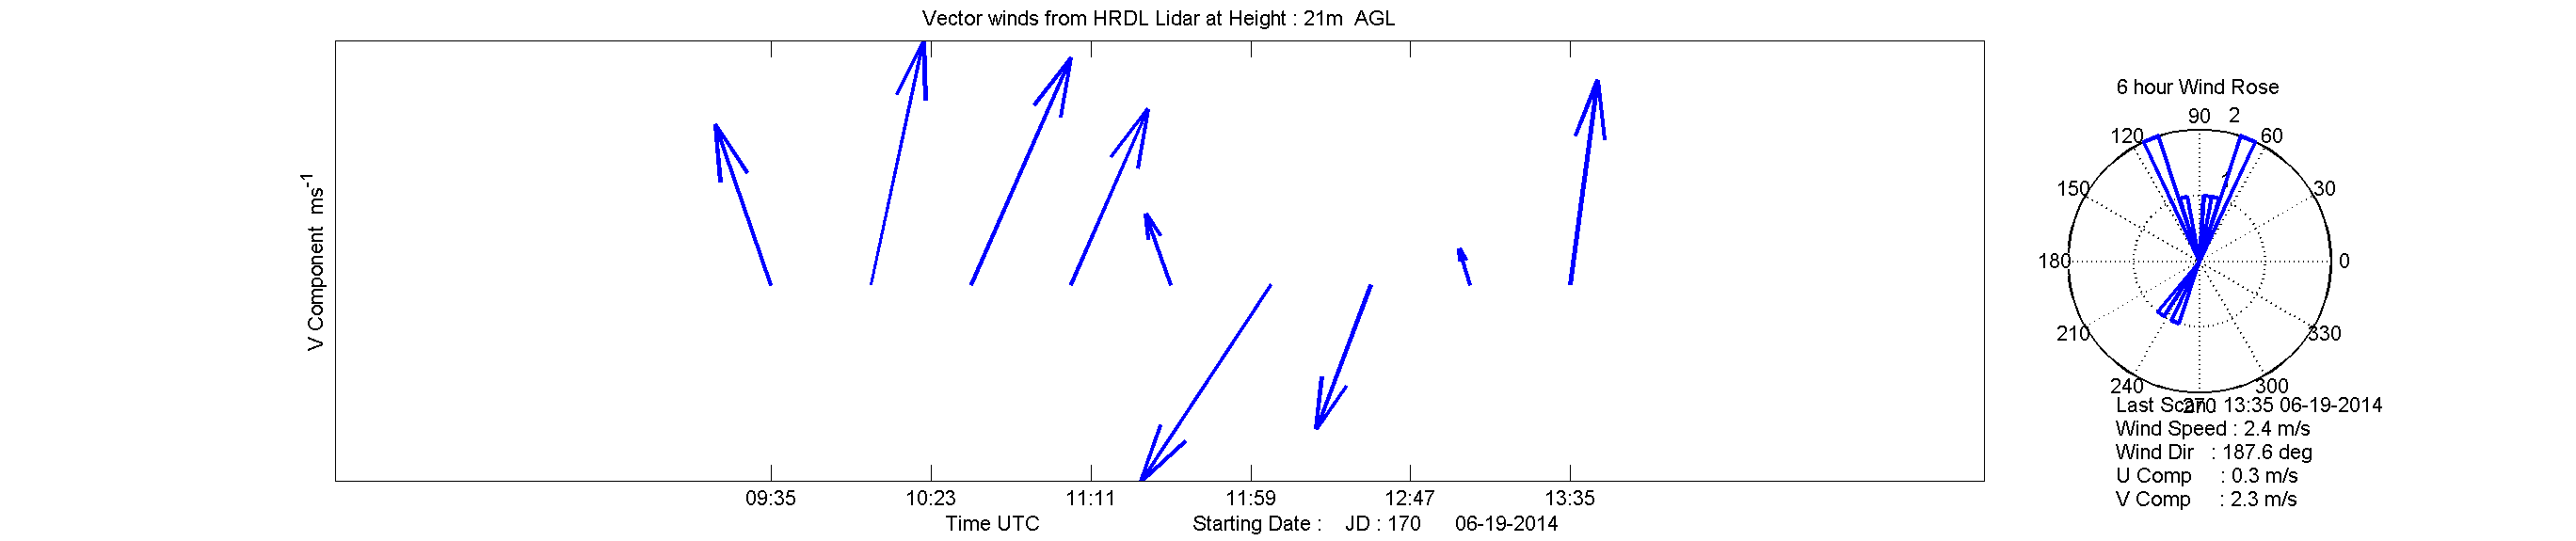 HRDL surface vector winds